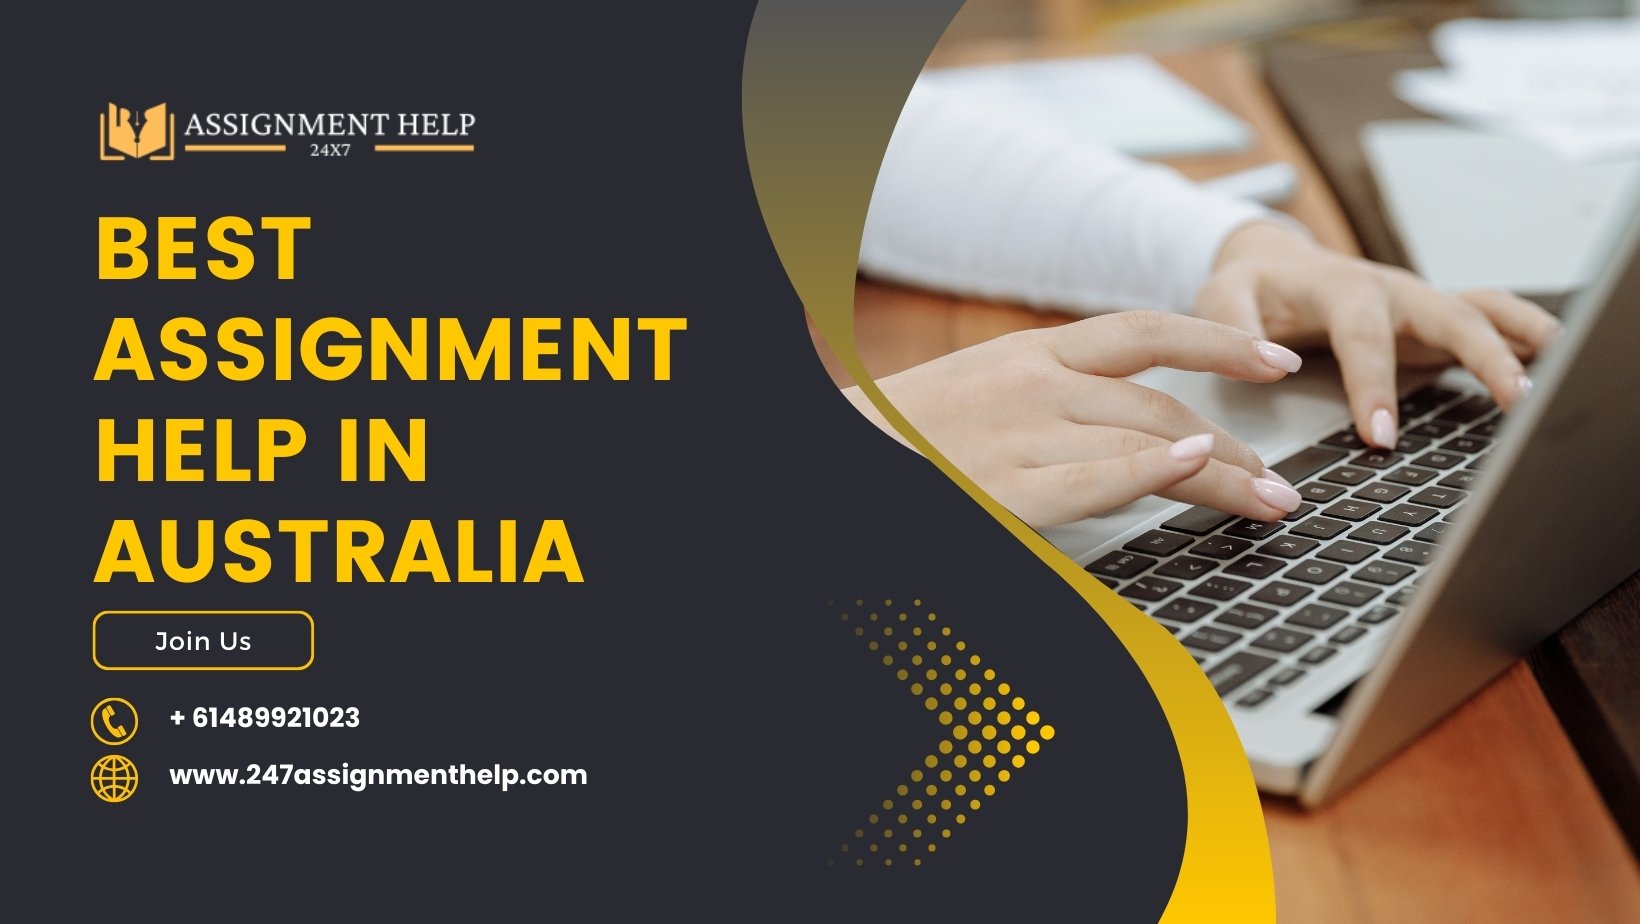 Assignment Help in Australia with the aid of Online Assignment Helpers